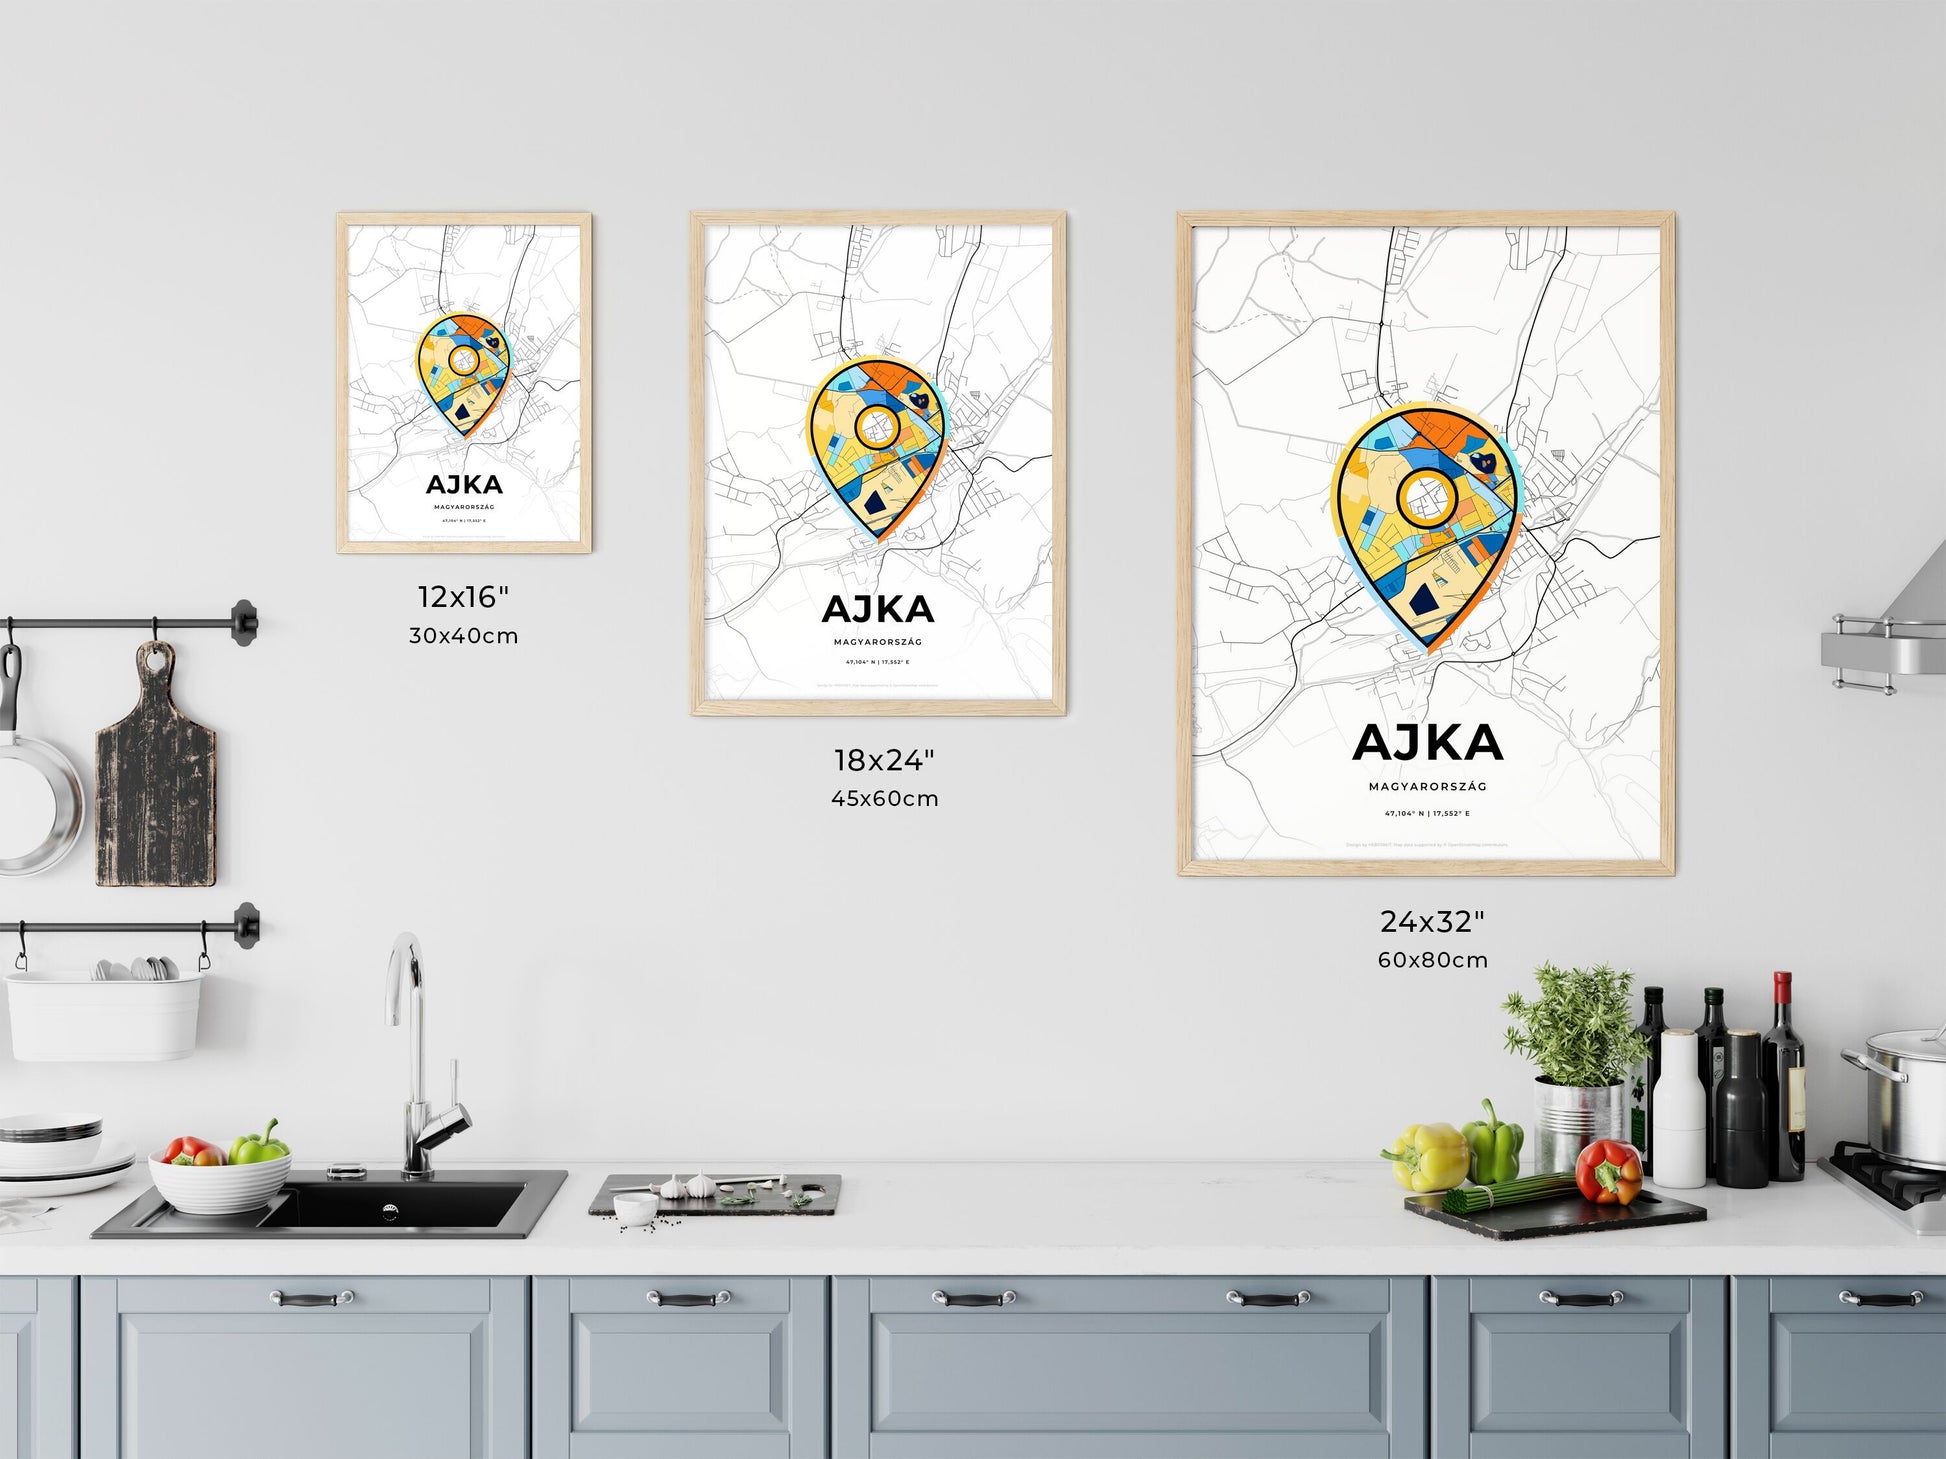 AJKA HUNGARY minimal art map with a colorful icon. Where it all began, Couple map gift.